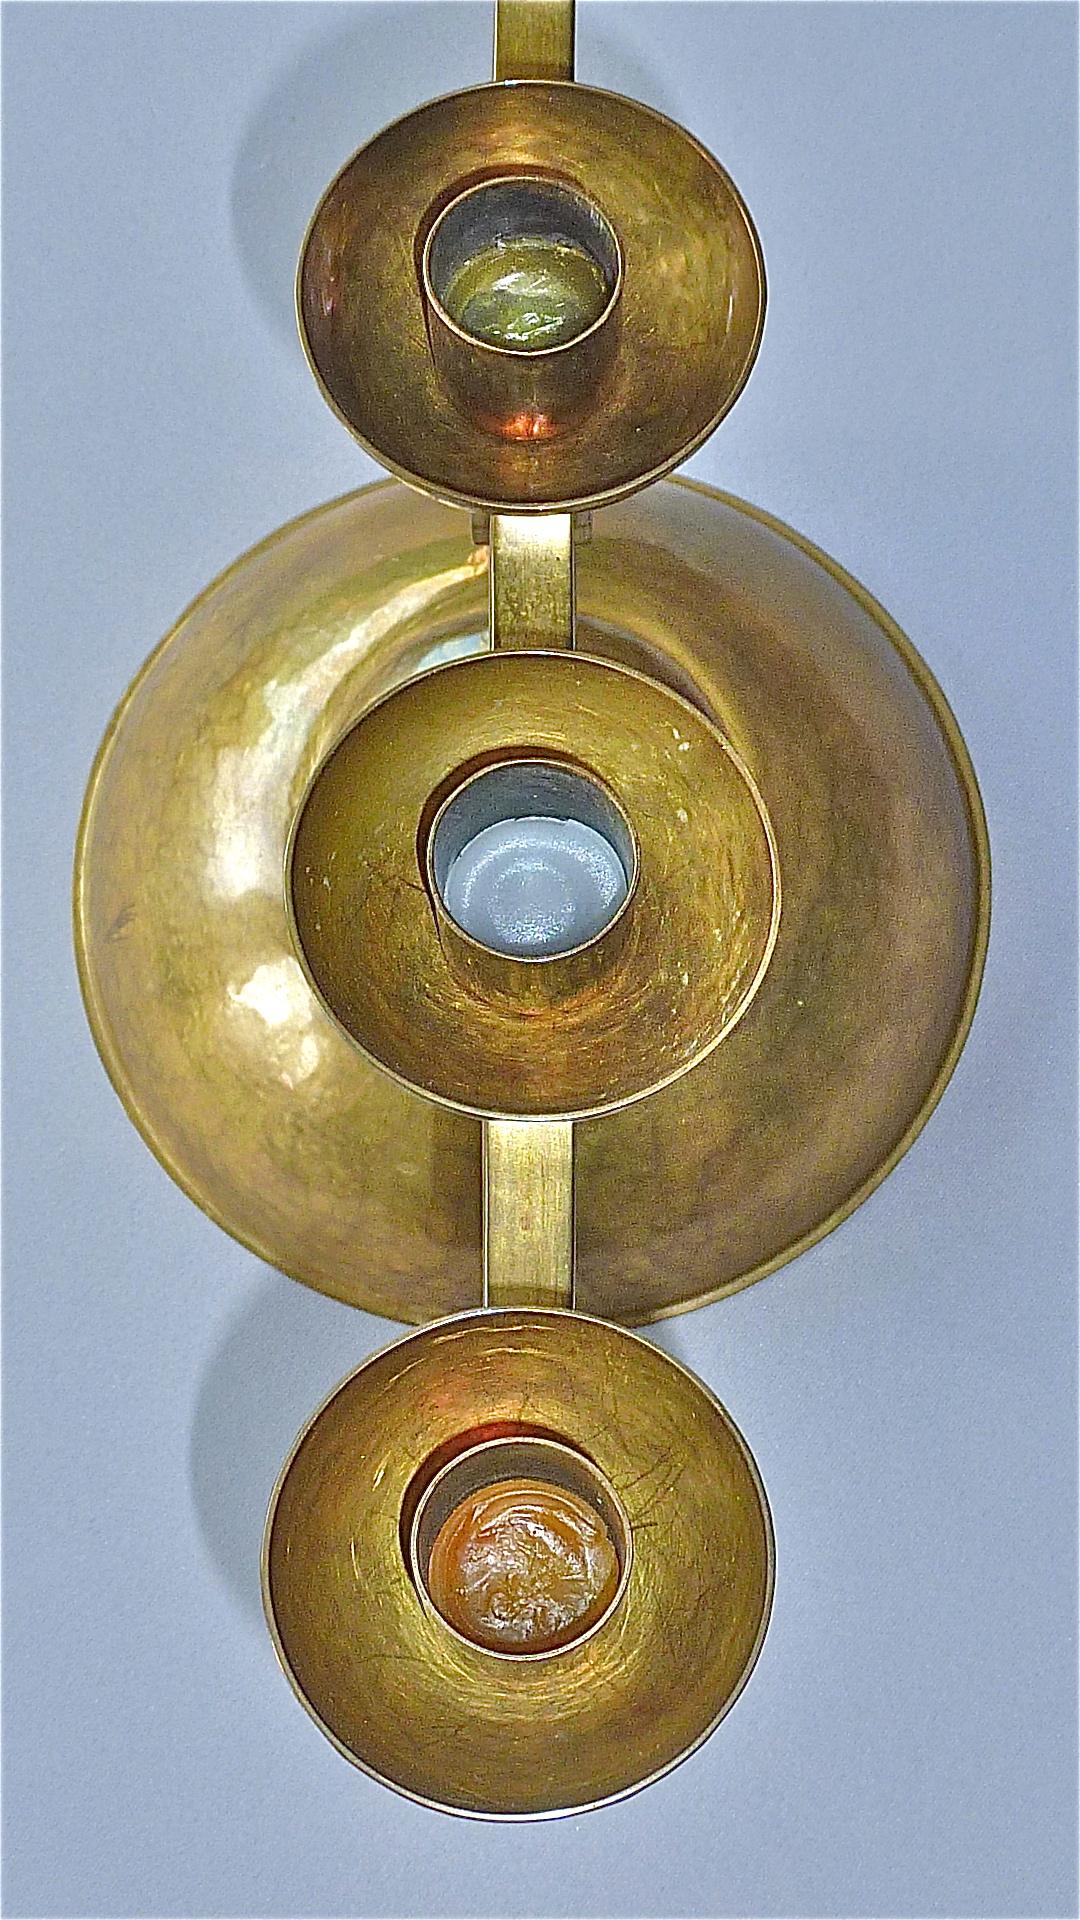 Hand-Chased Brass Bauhaus Art Deco Candle Holder Signed Bohde 1920s Candelabras For Sale 2